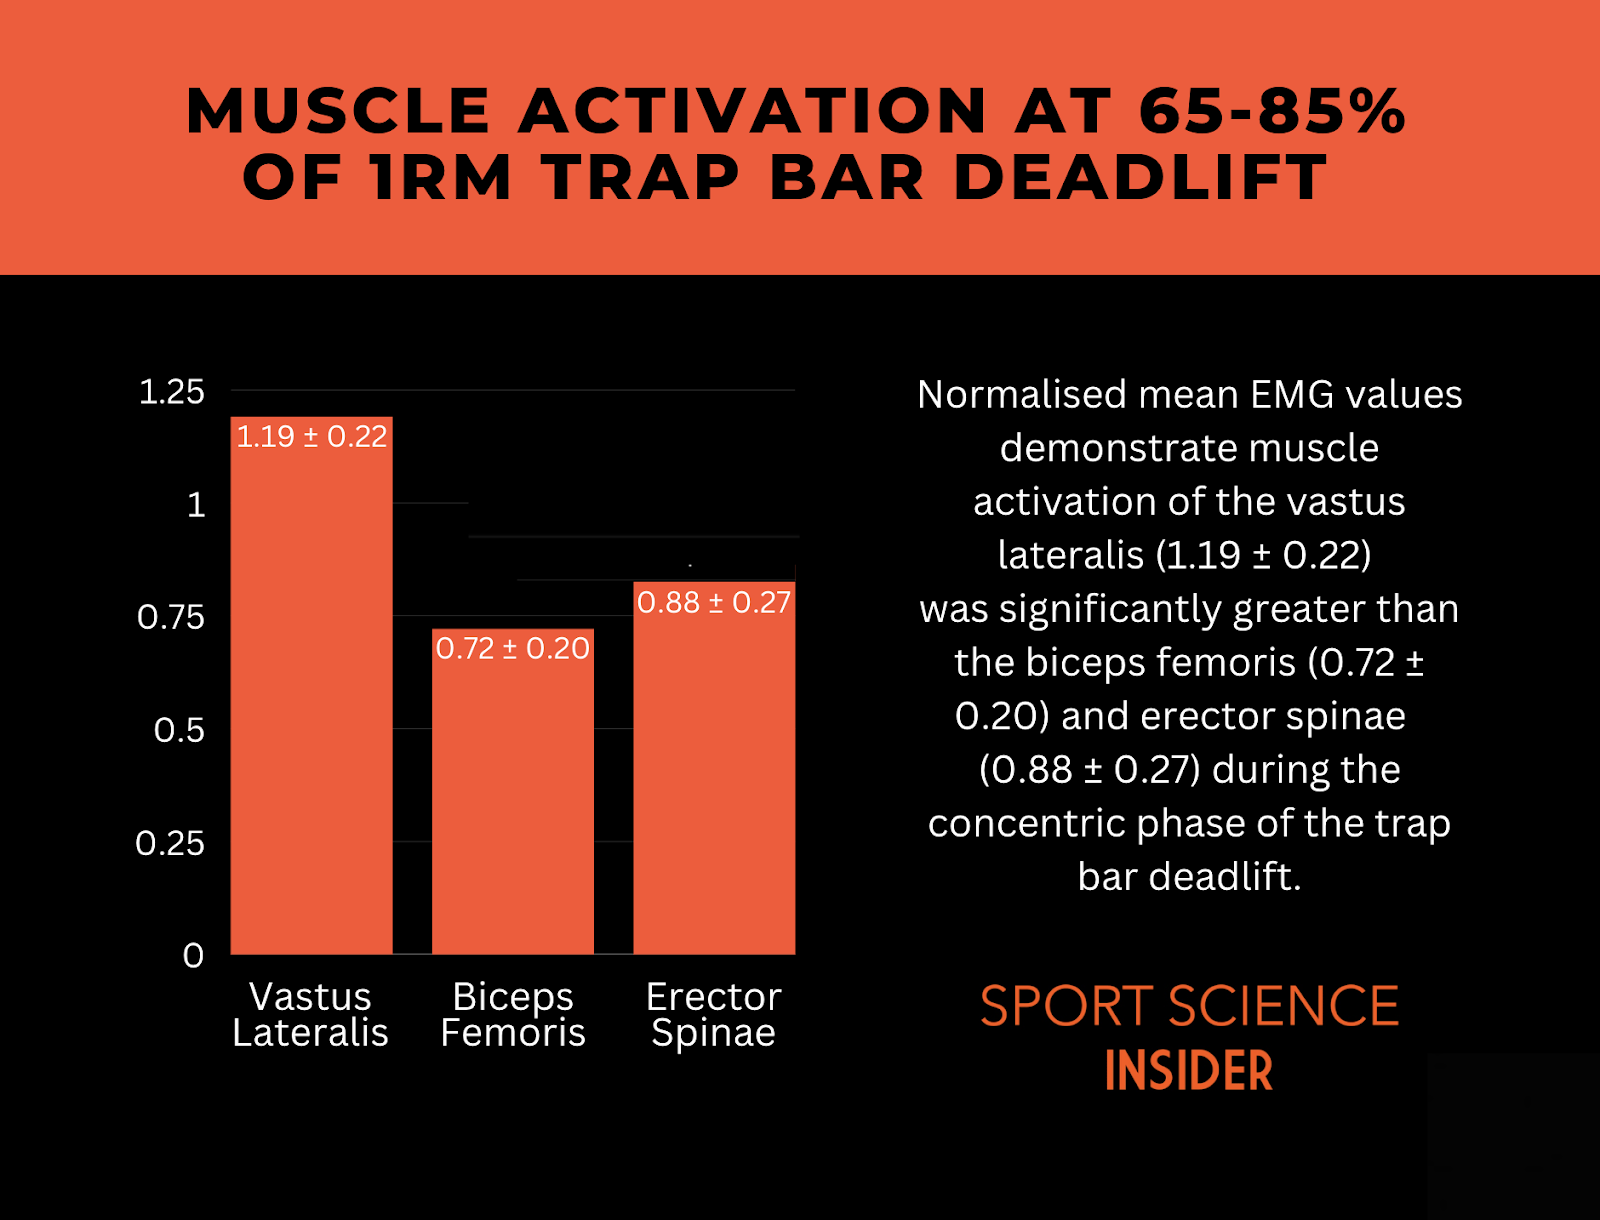 Muscle activation of vastus laterals, biceps femurs and erector spinae at 65-85% of 1RM trap bar deadlift